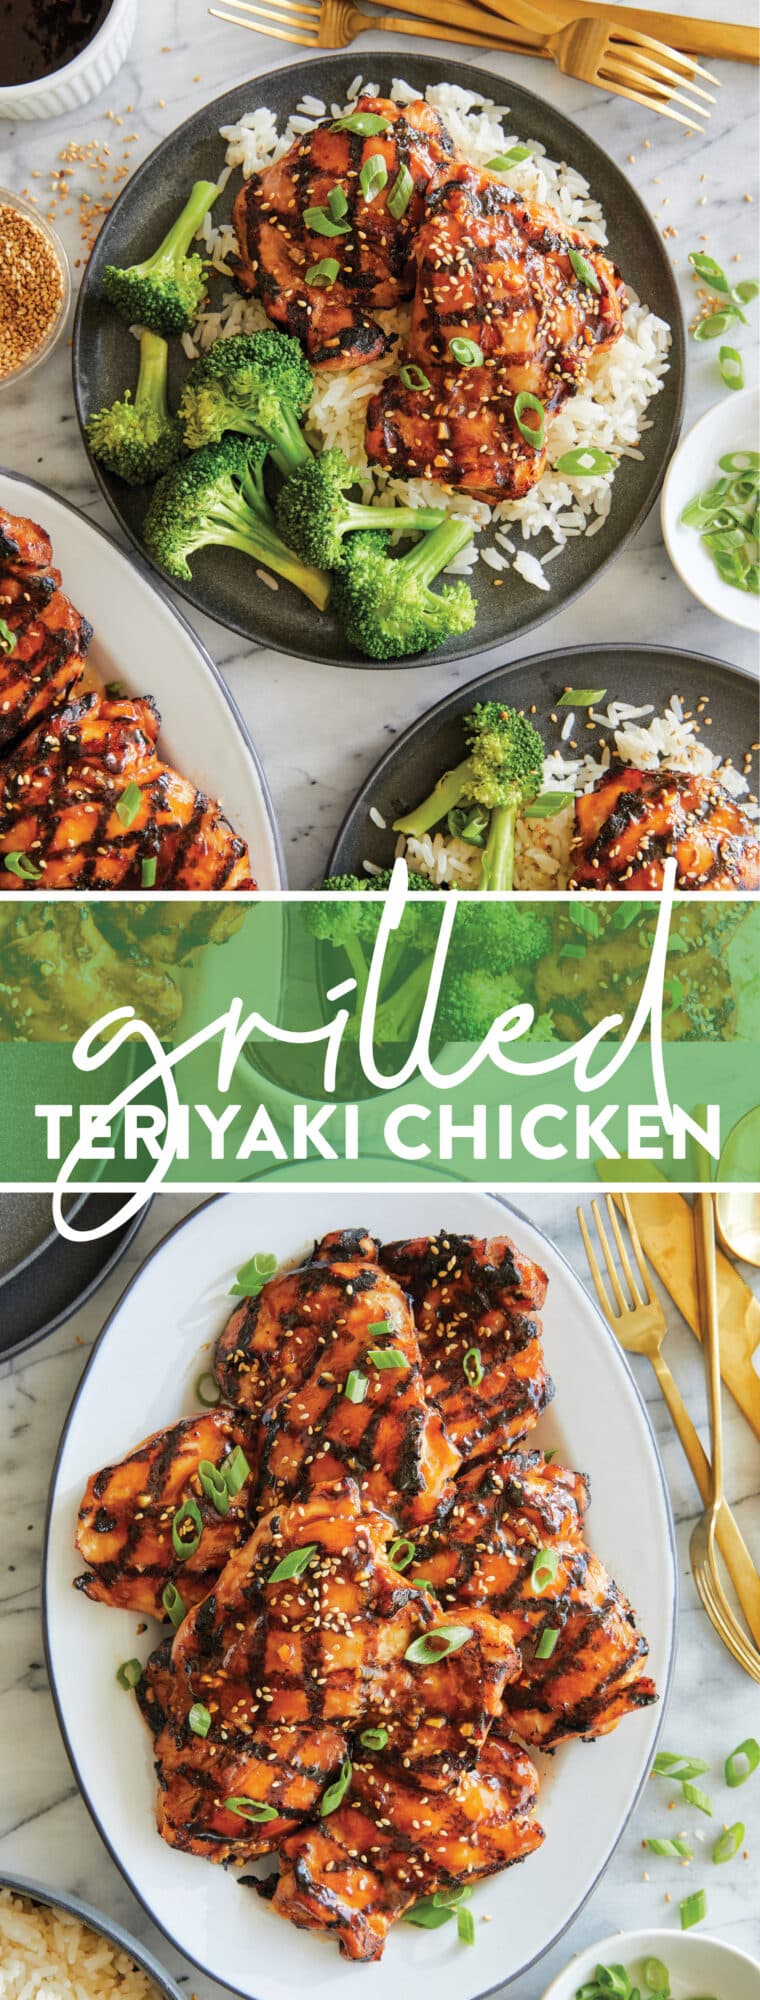 Grilled Teriyaki Chicken - So saucy, so sticky, so so good! And you can prep and marinate everything ahead of time! Serve over rice + veggies.